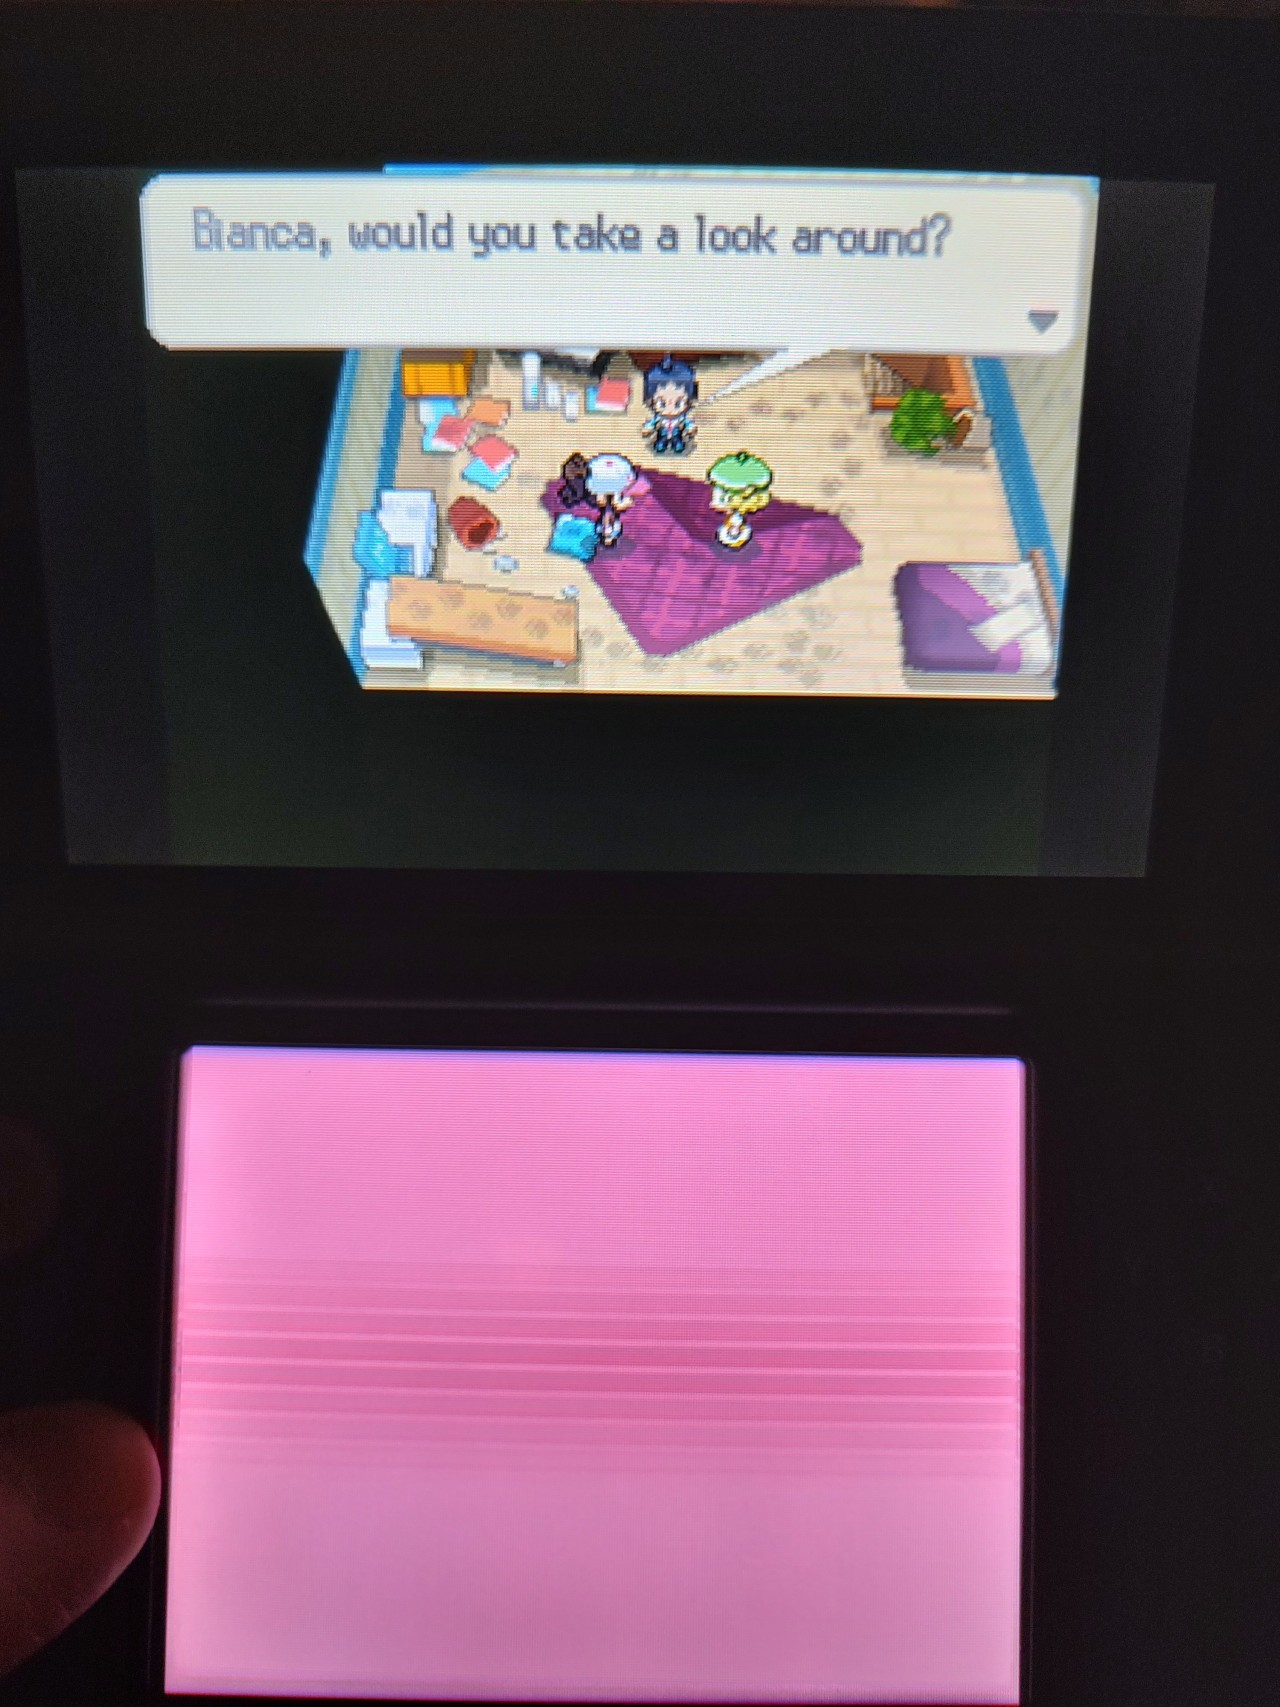 A picture of the main character's bedroom from Pokémon Black. It has been destroyed due to a Pokémon battle